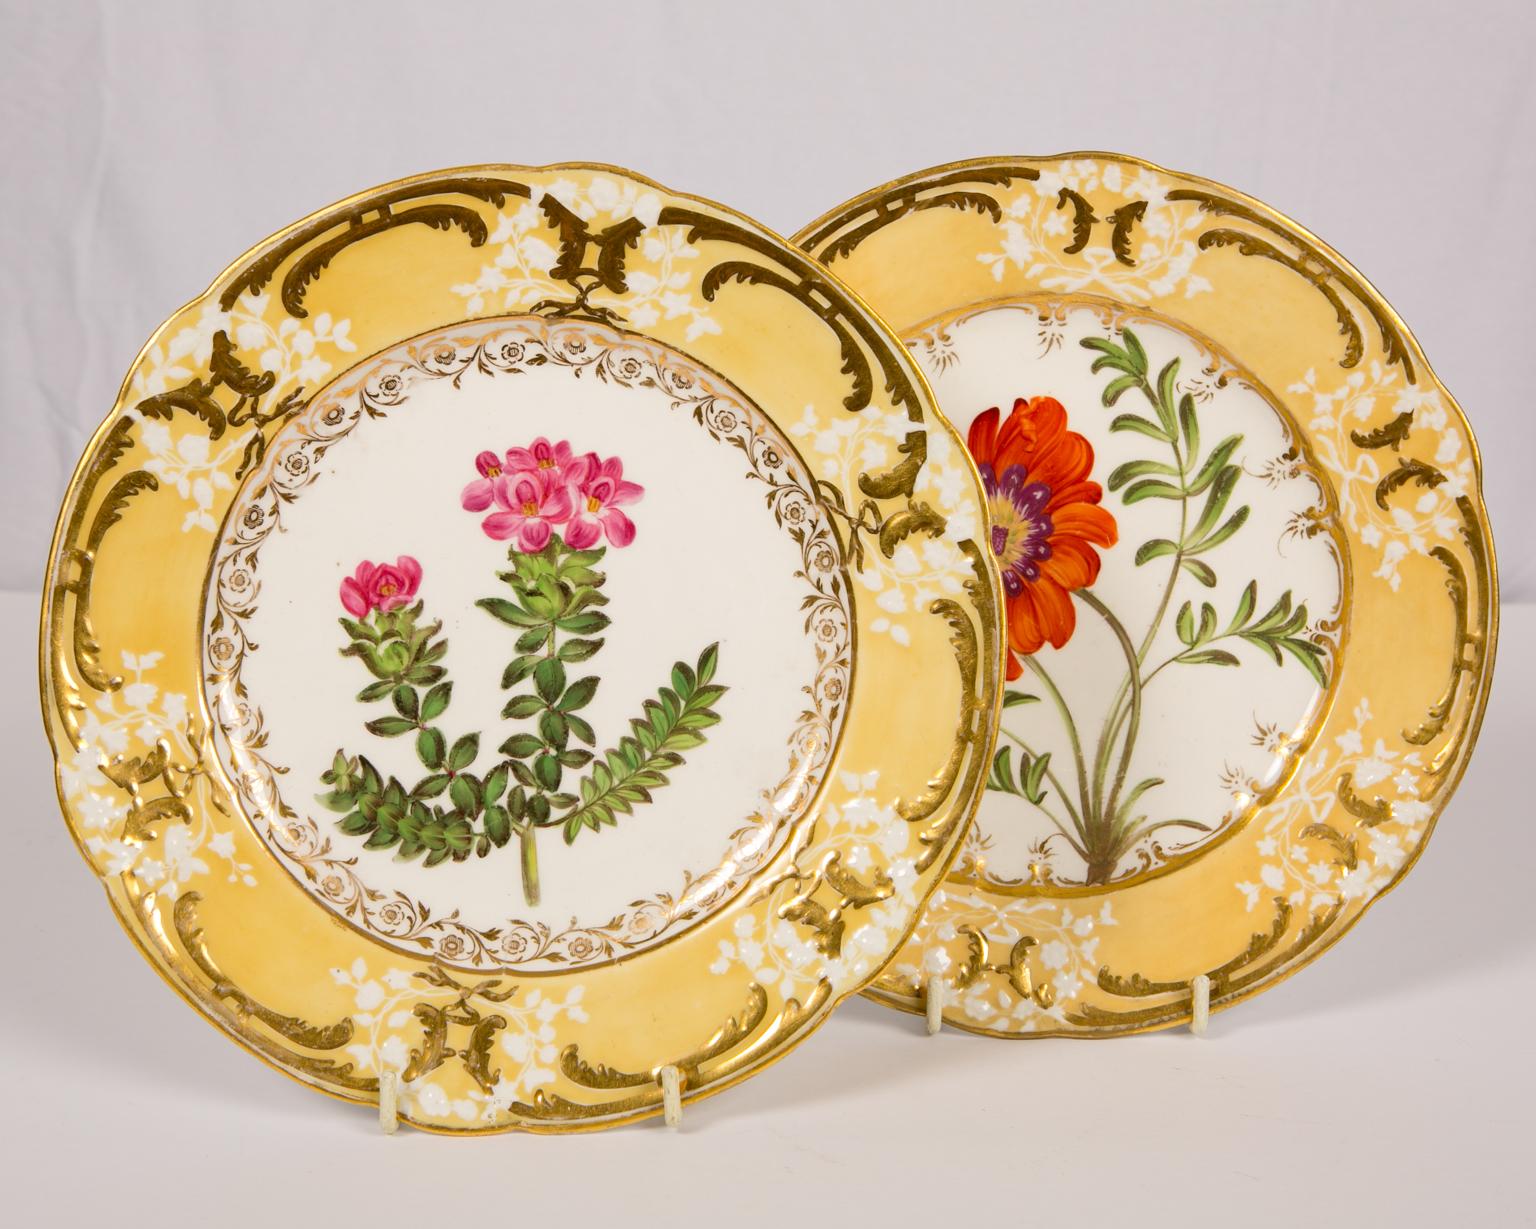 Rococo Revival Pair of Antique Dishes with Single Hand-Painted Flower circa 1825